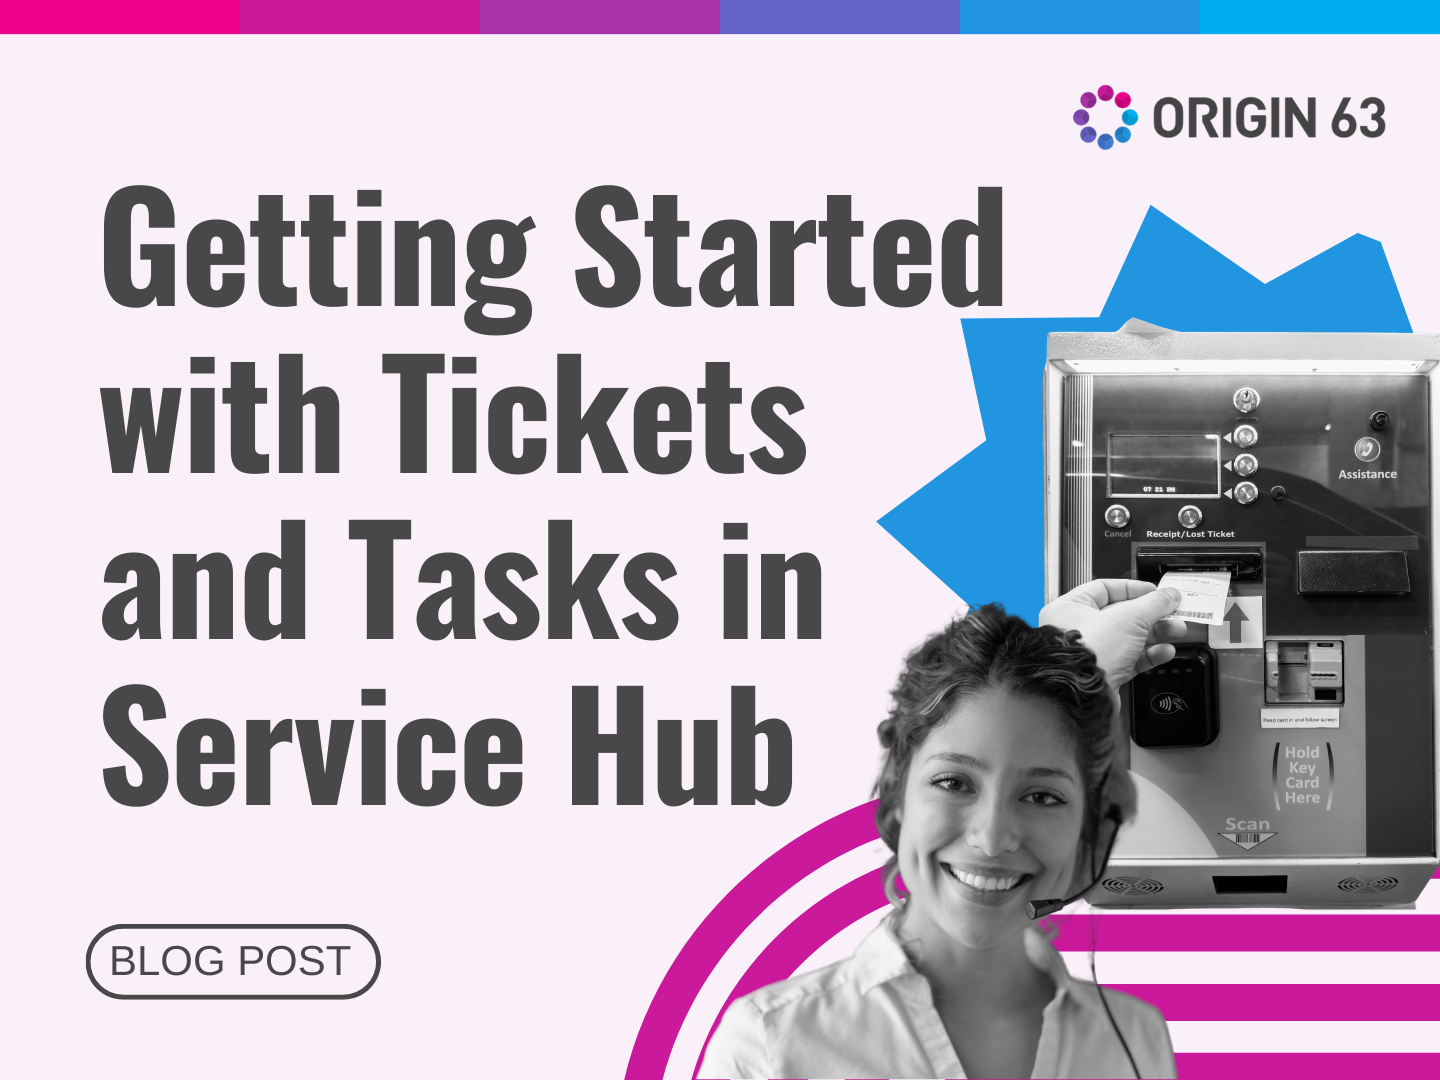 Enhance customer service with HubSpot's Service Hub: streamline requests through tickets, manage workflows with tasks for efficient support.